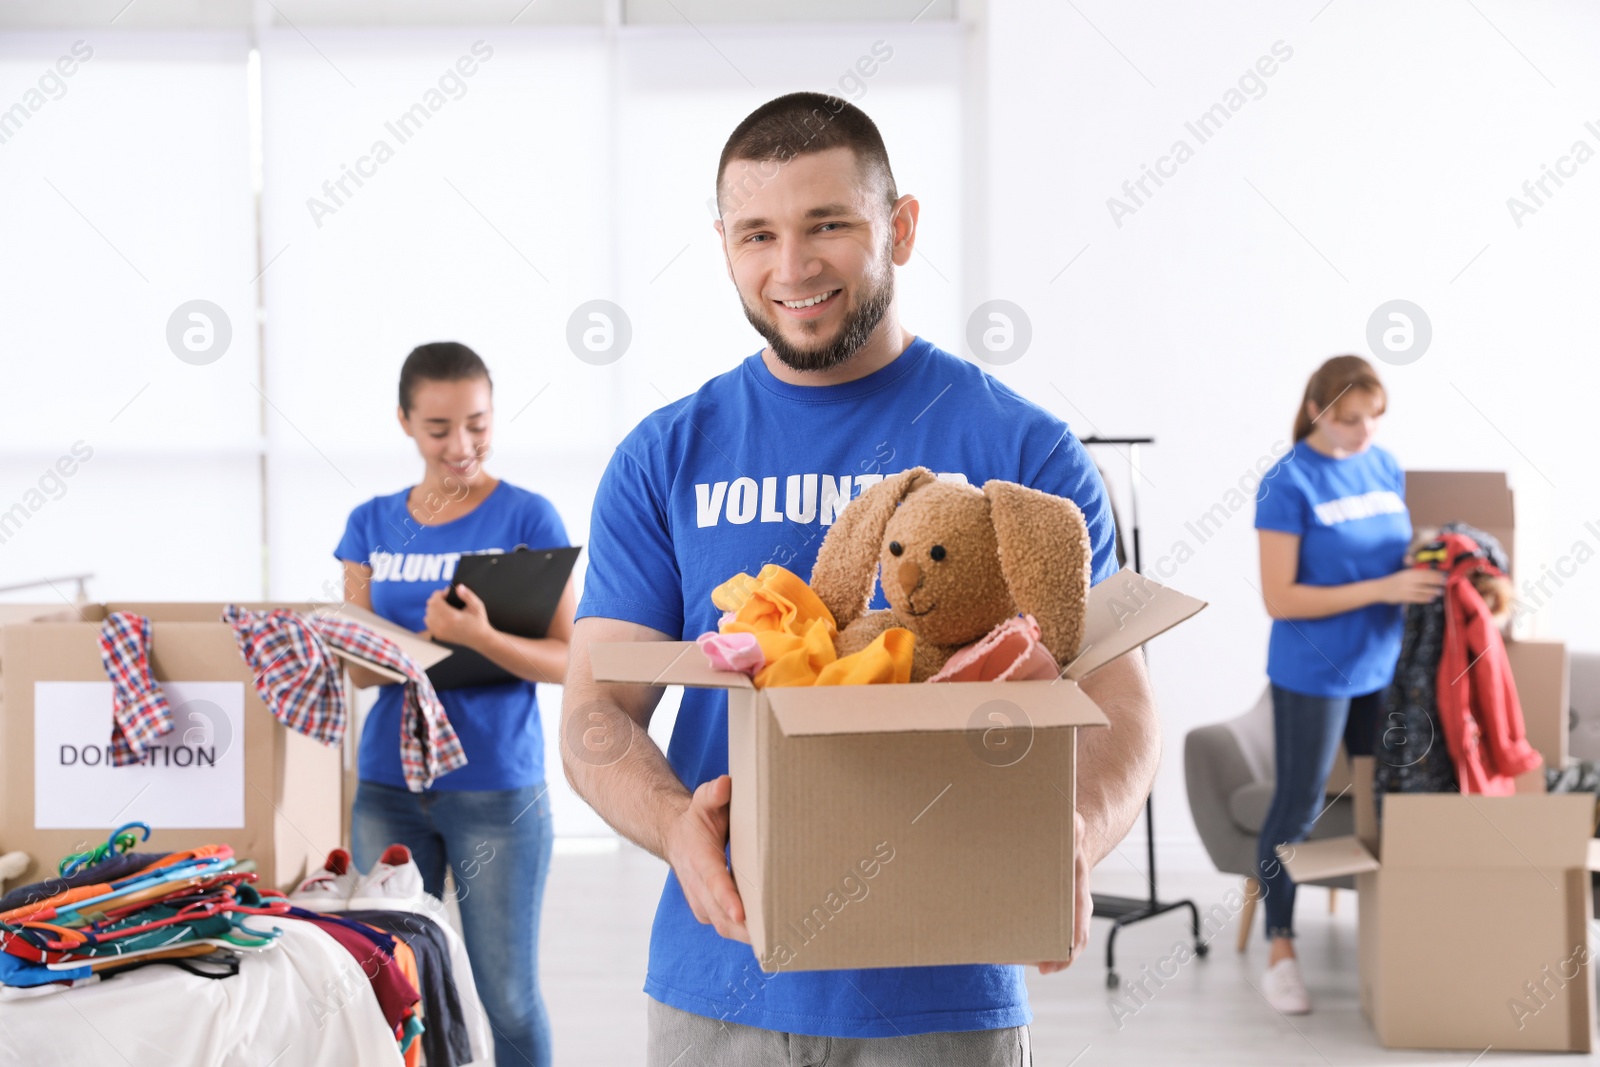 Photo of Male volunteer holding box with donations indoors